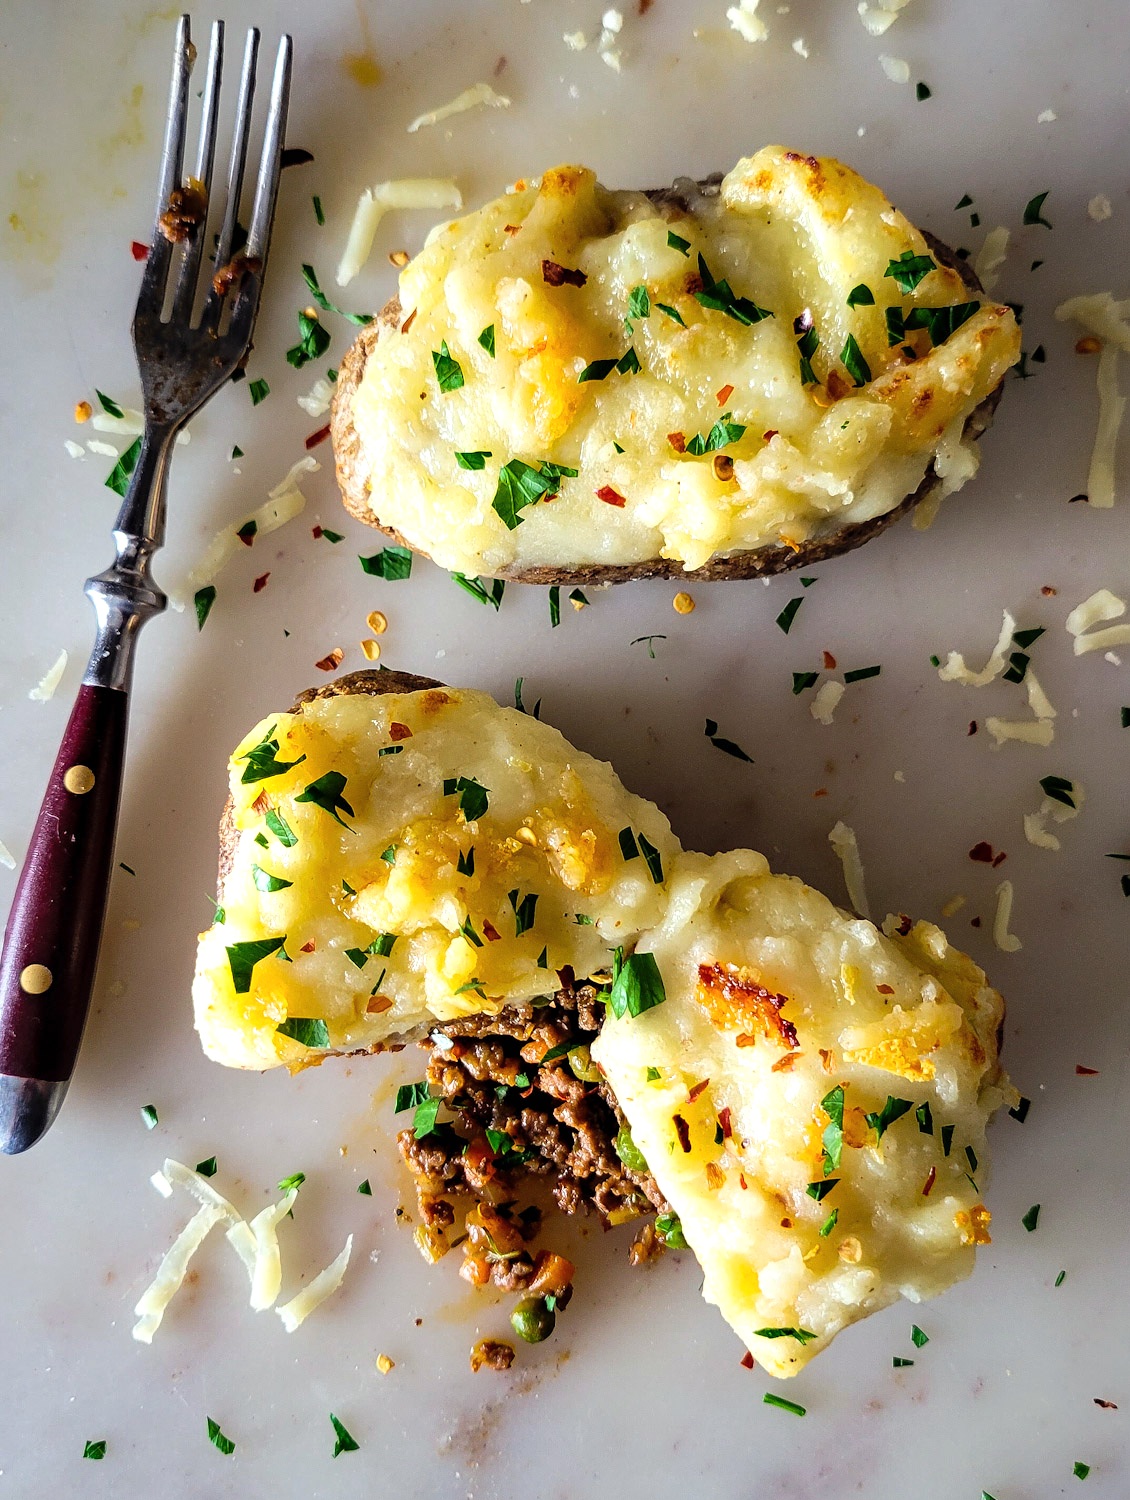 Looking down on two Shepherd's Pie Stuffed Potatoes, with some of the filling spilling out from the potato.